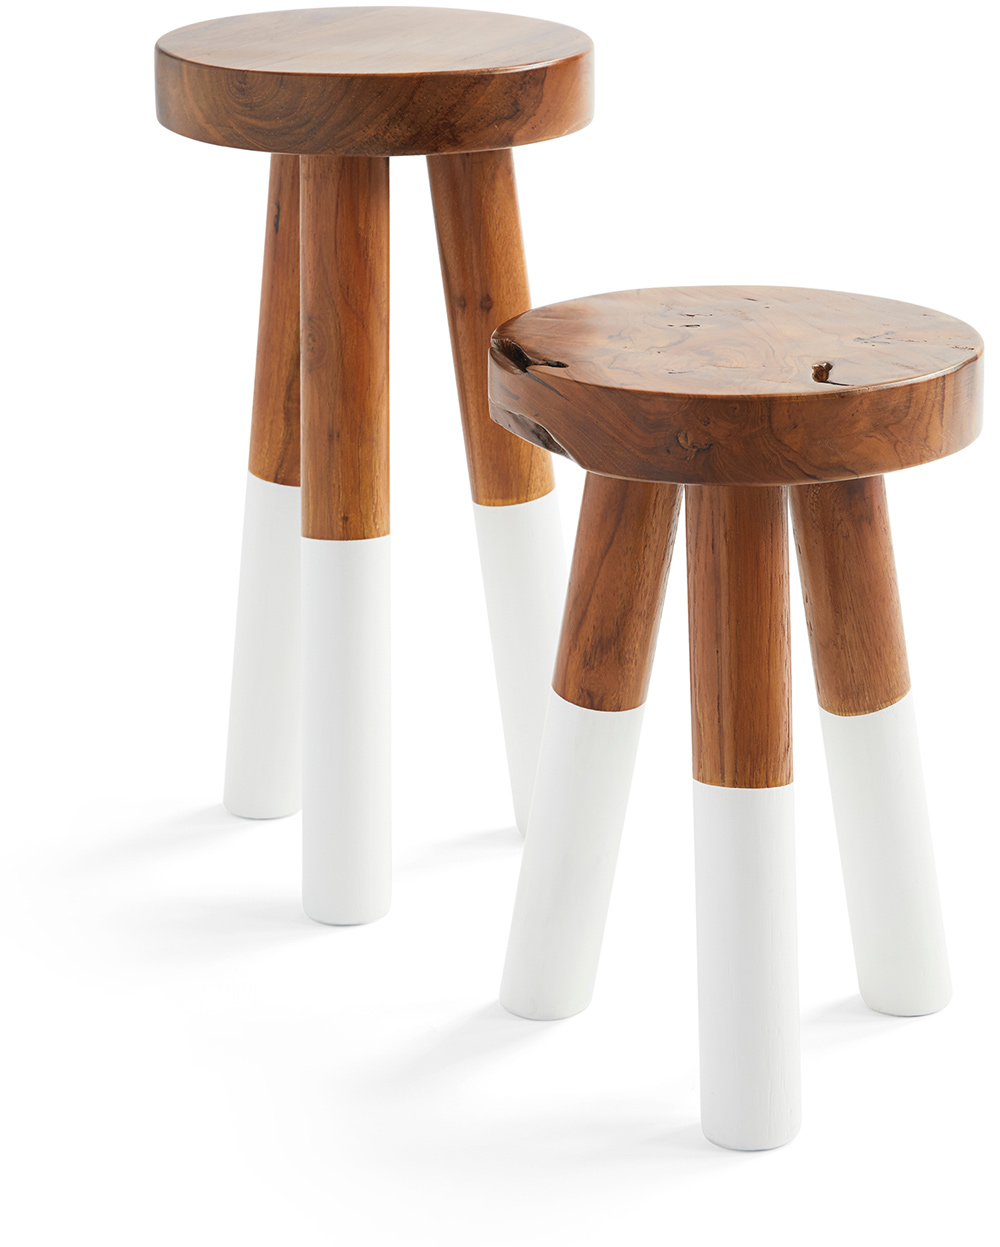 two Serena & Lily white Dip-Dyed Stools